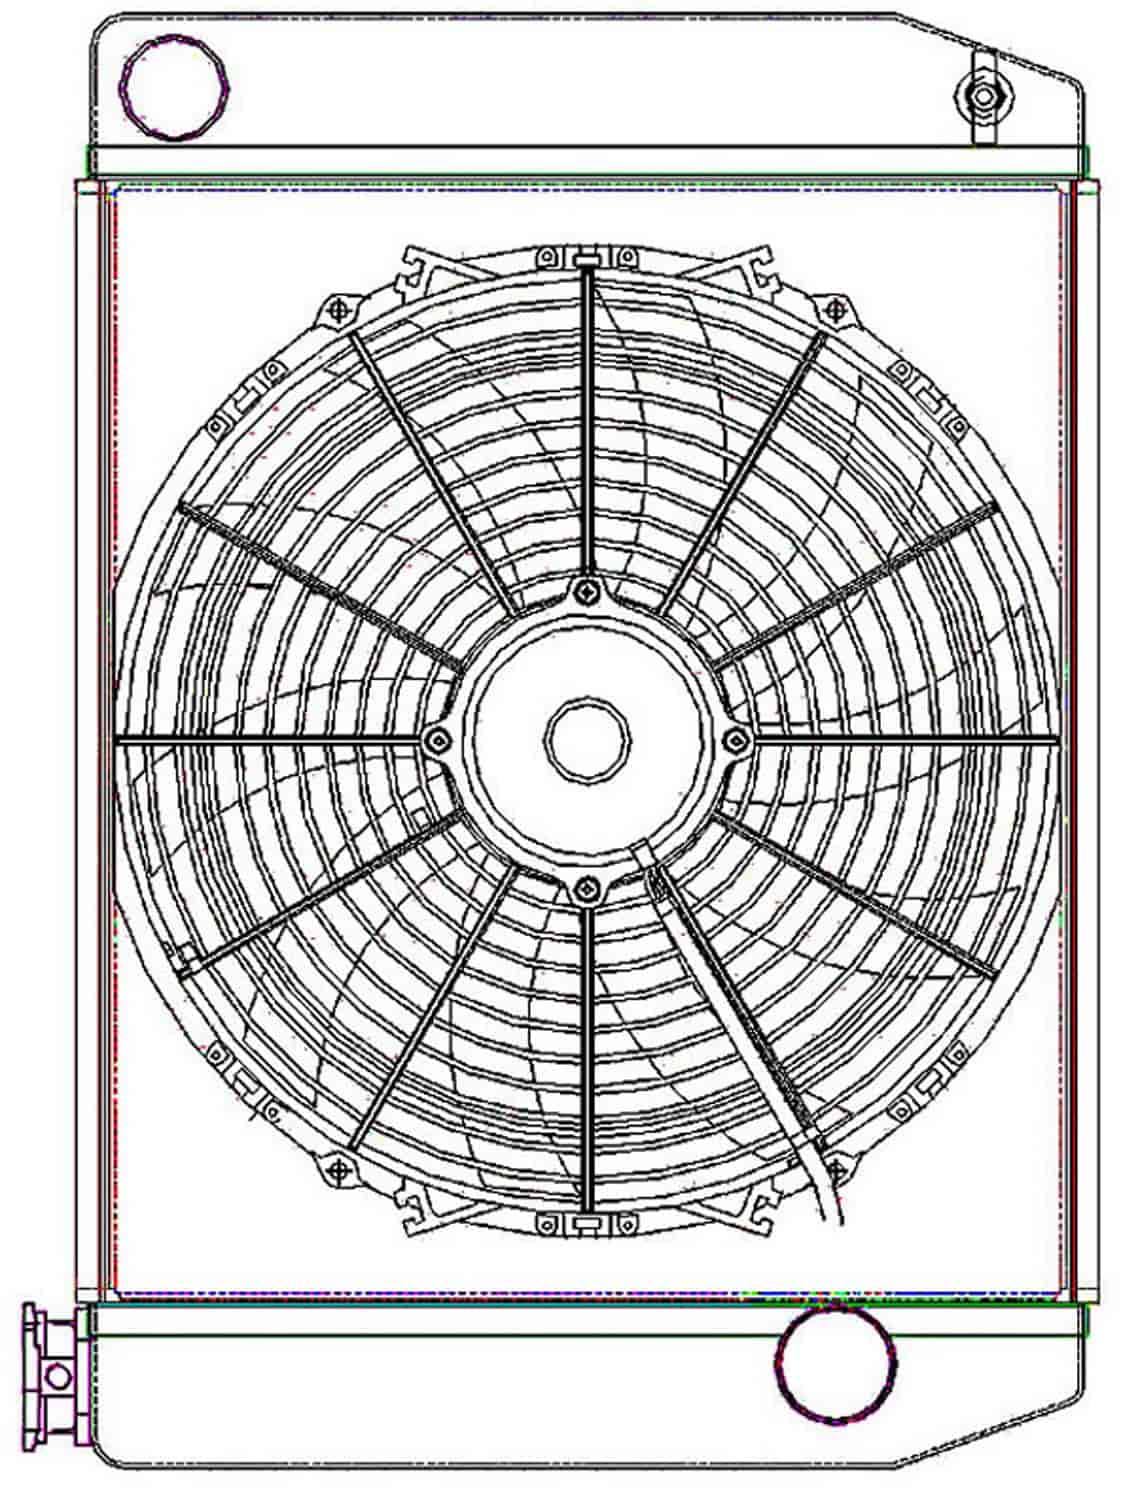 ClassicCool ComboUnit Universal Fit Radiator and Fan Single Pass Crossflow Design 22" x 15.50" with Straight Outlet